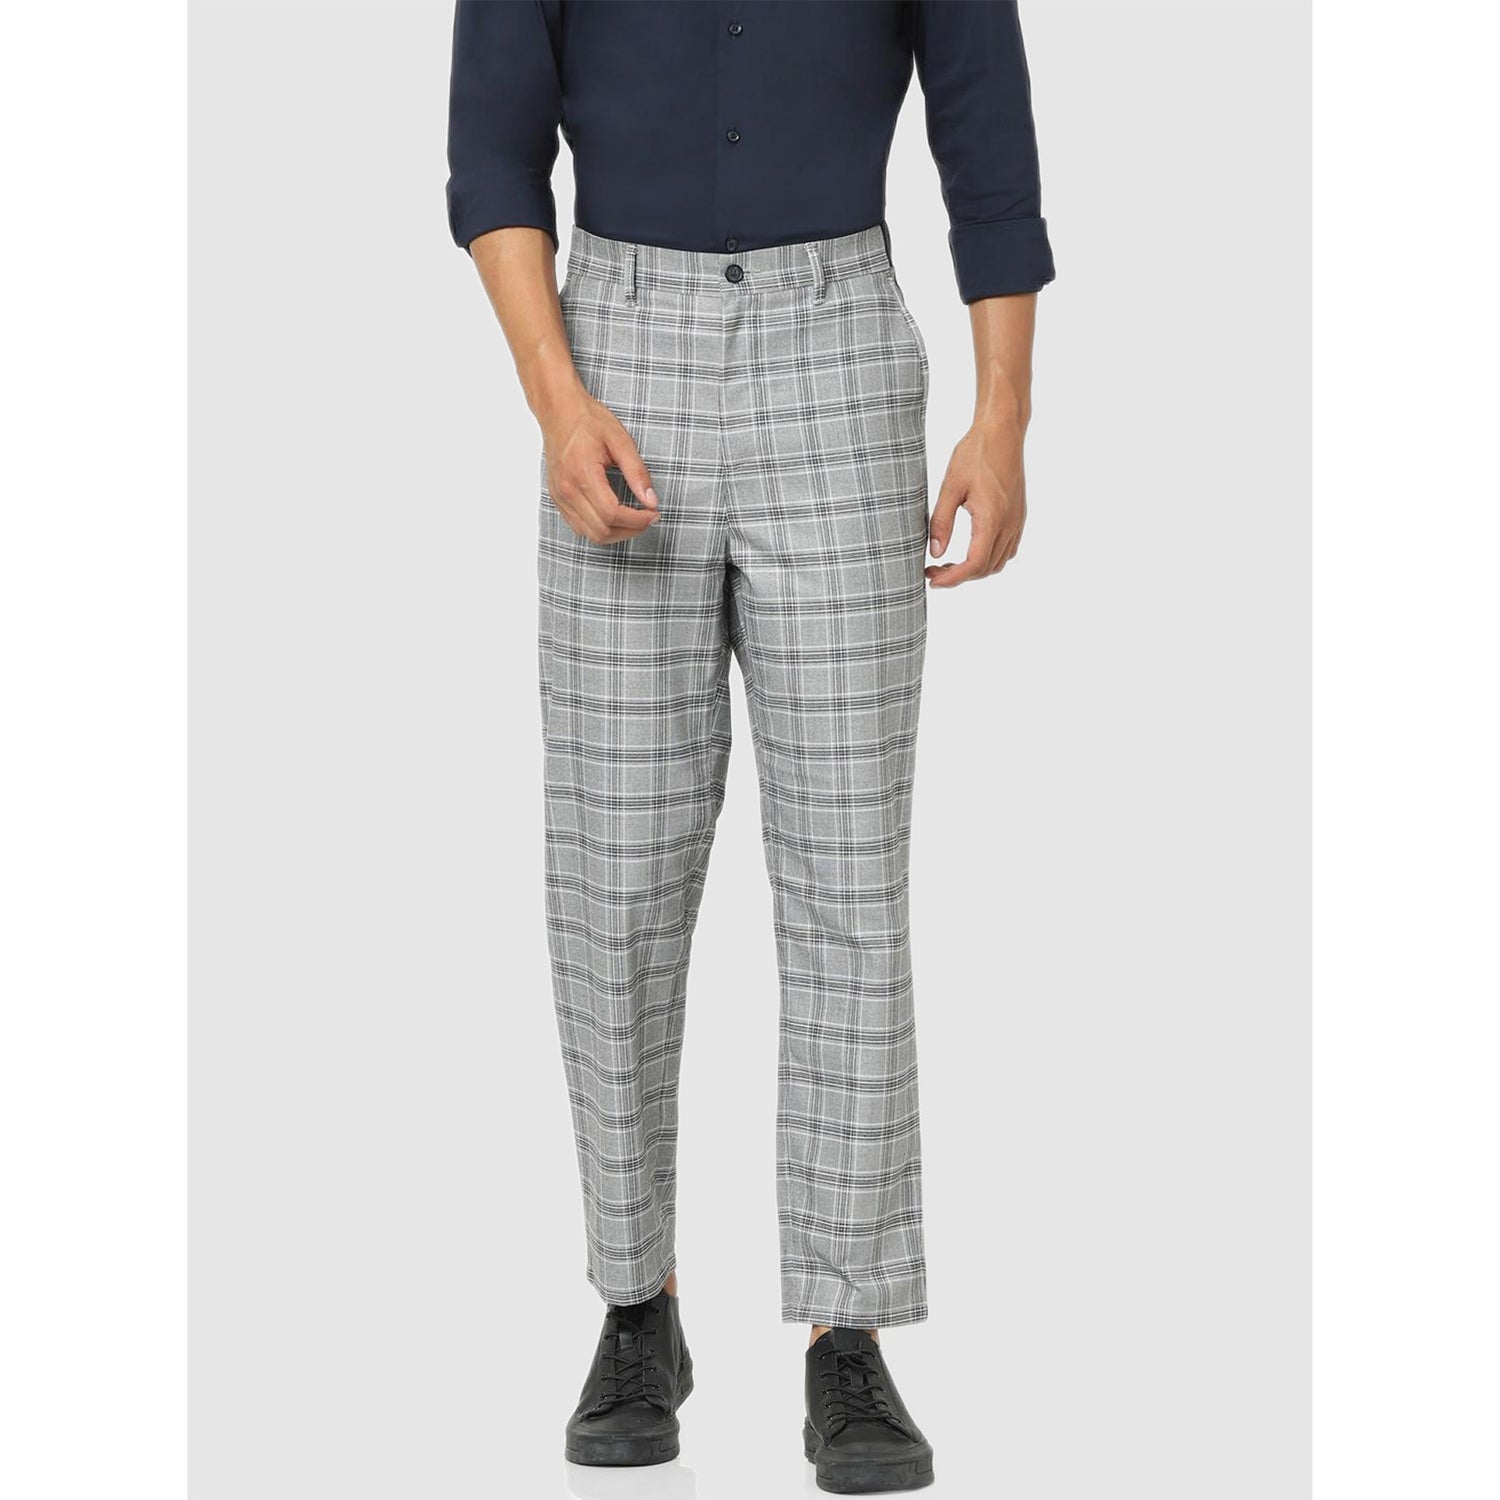 Grey Checked Classic Trousers (COZAR)